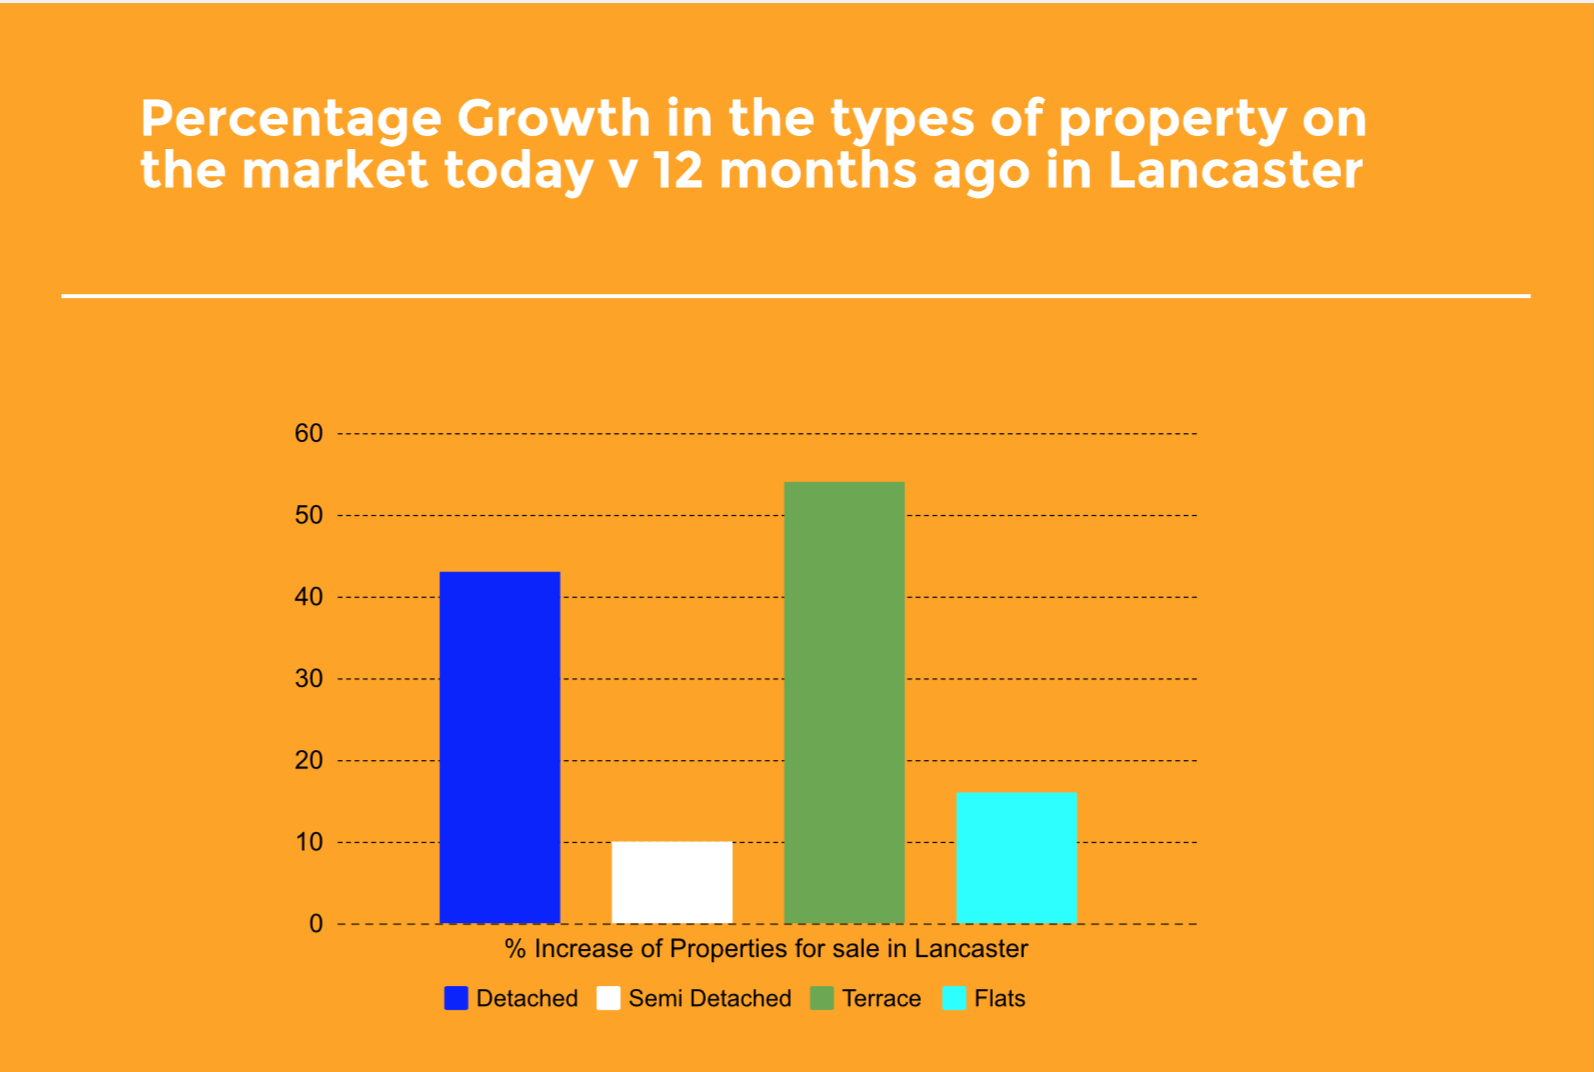 Percentage Growth in the types of property on the market today v 12 months ago in Lancaster